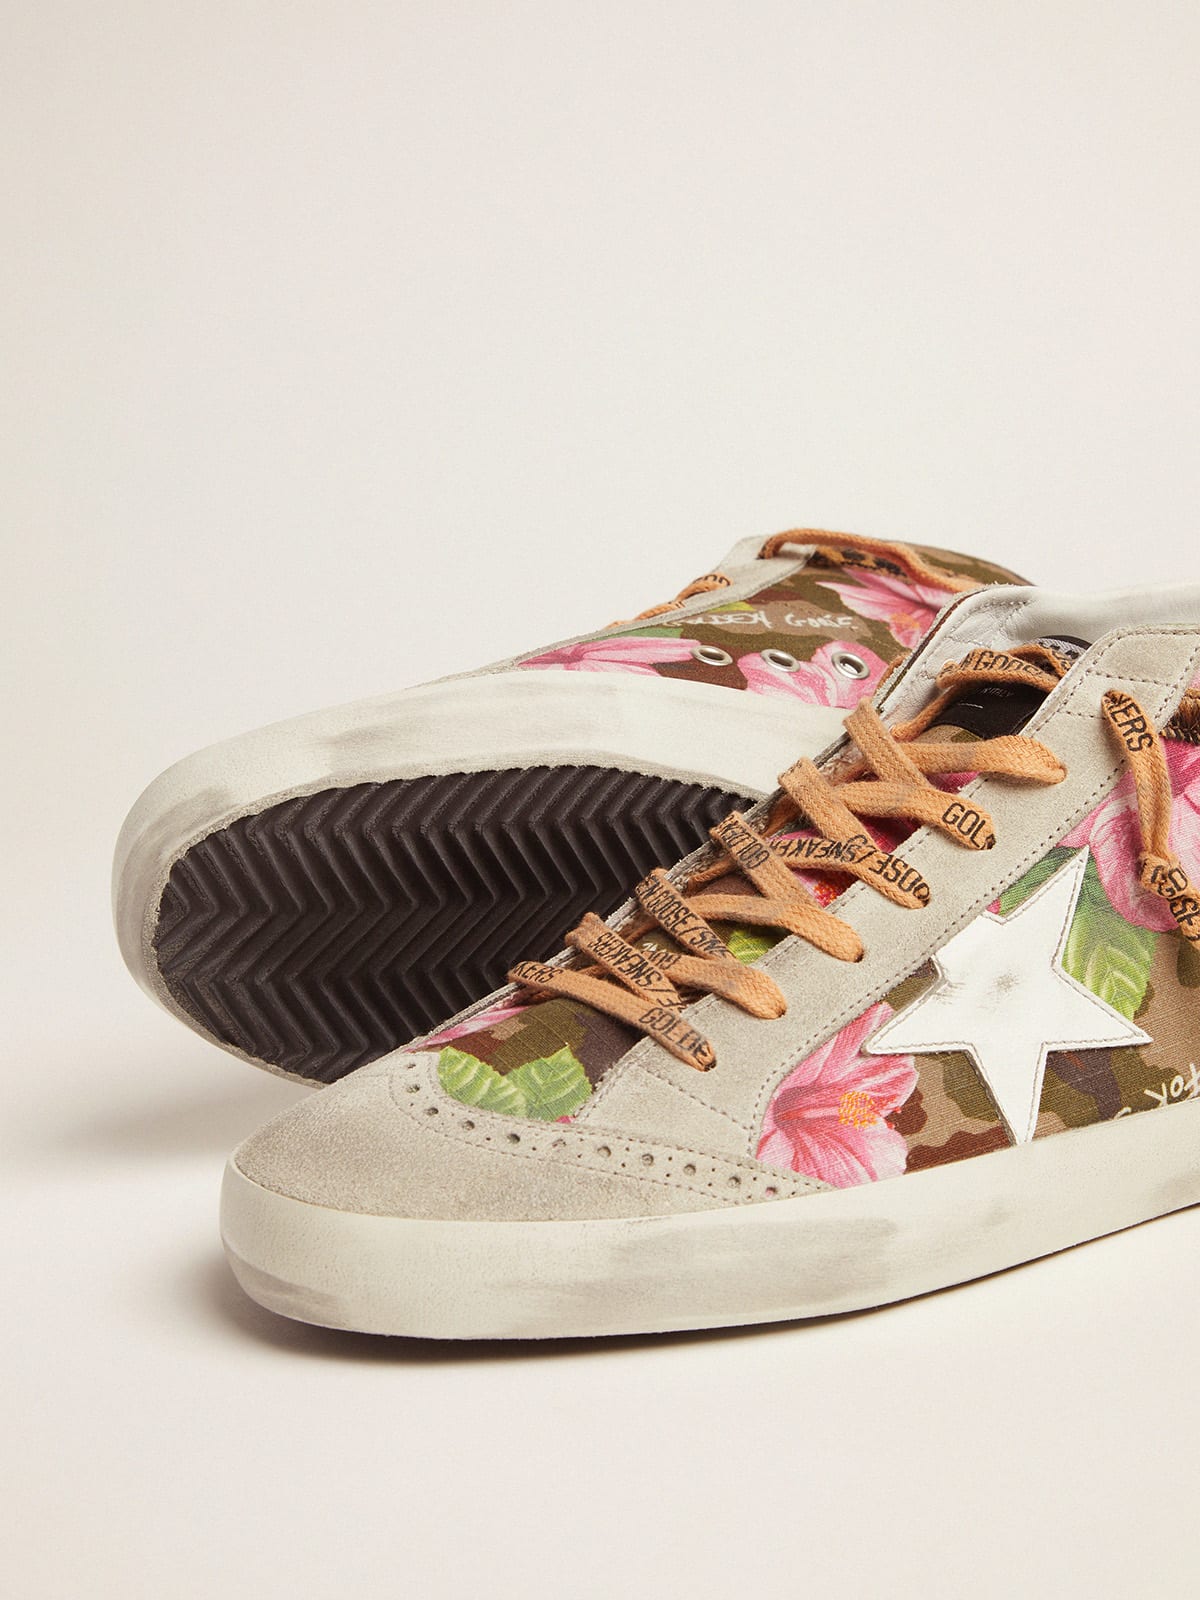 Golden Goose - Mid Star sneakers with camouflage and floral pattern in 